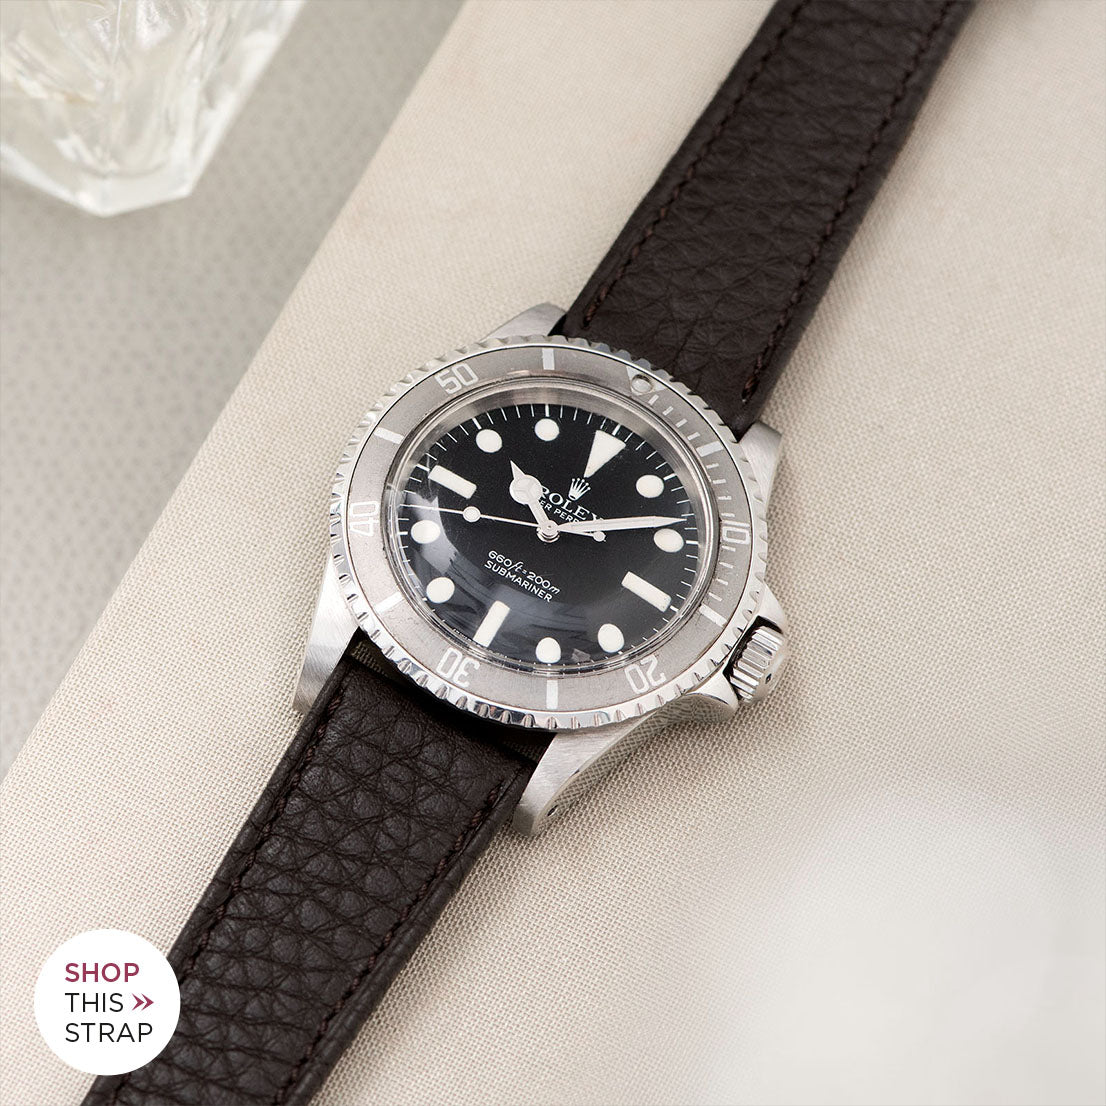 Bulang and Sons_Strap Guide_The Rolex 5513 Faded Maxi Submariner_Taurillon Dark Brown Speedy Leather Watch Strap